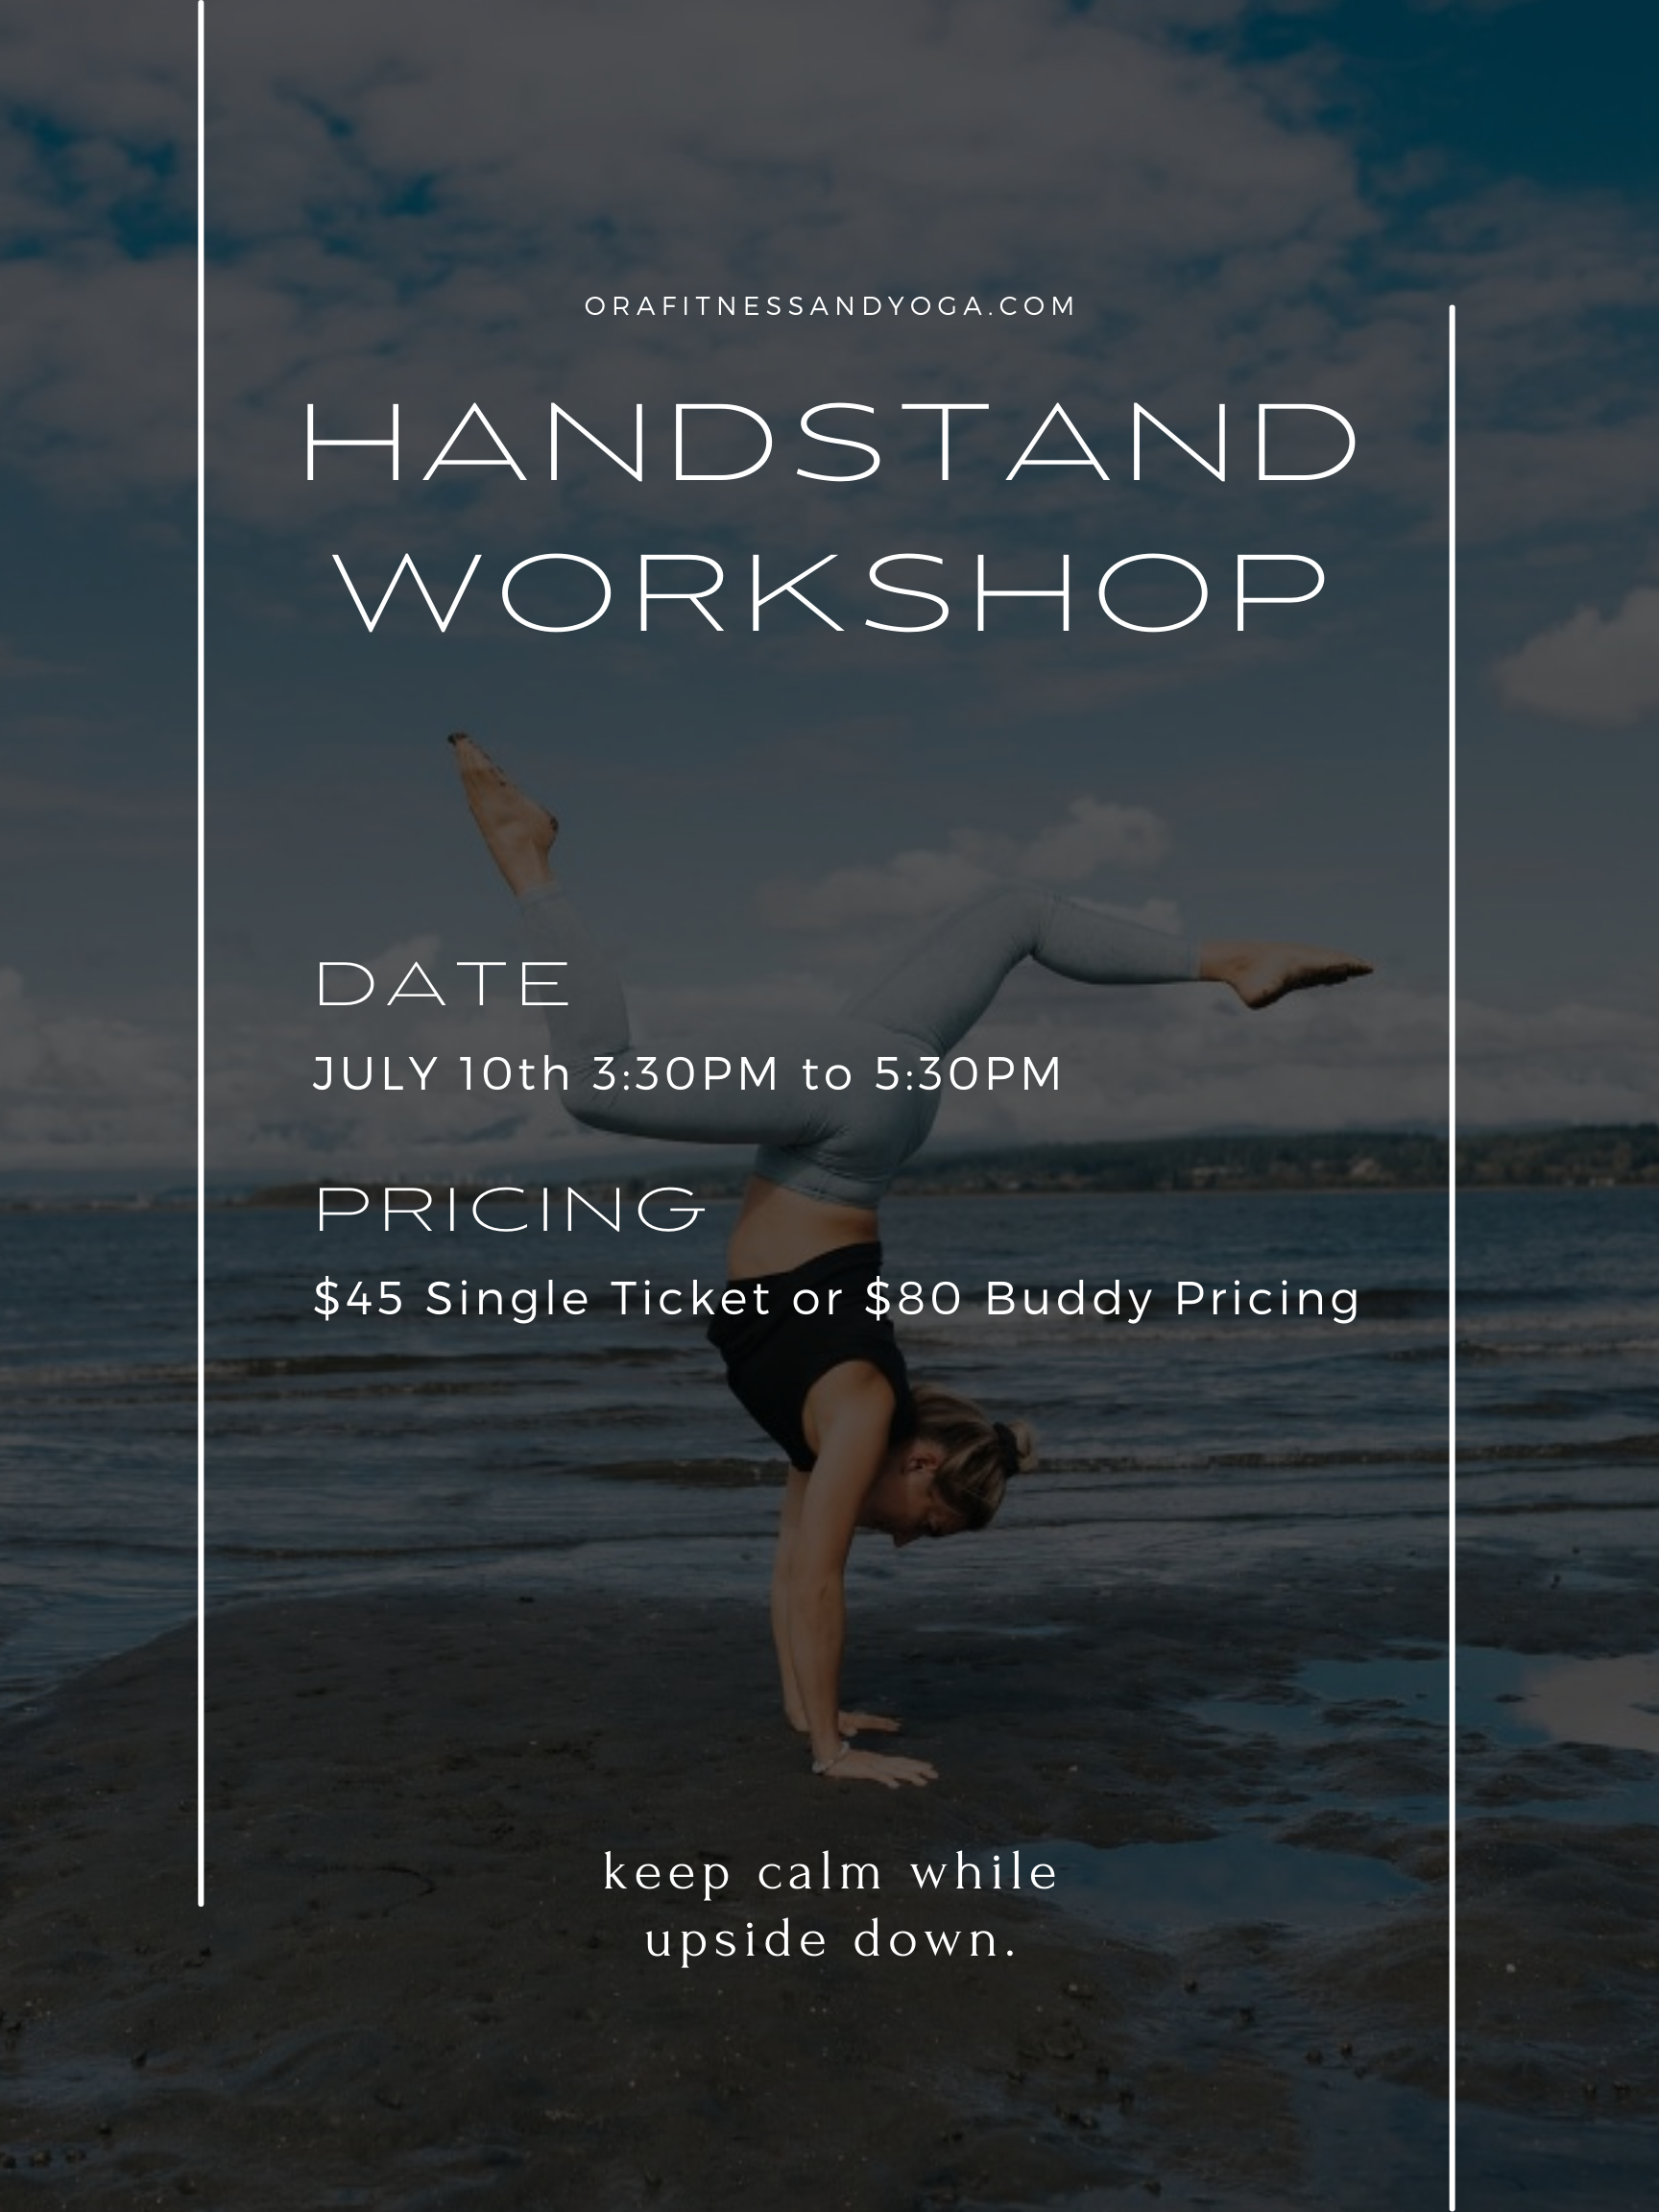 Handstand Workshop at Ora Fitness and Yoga